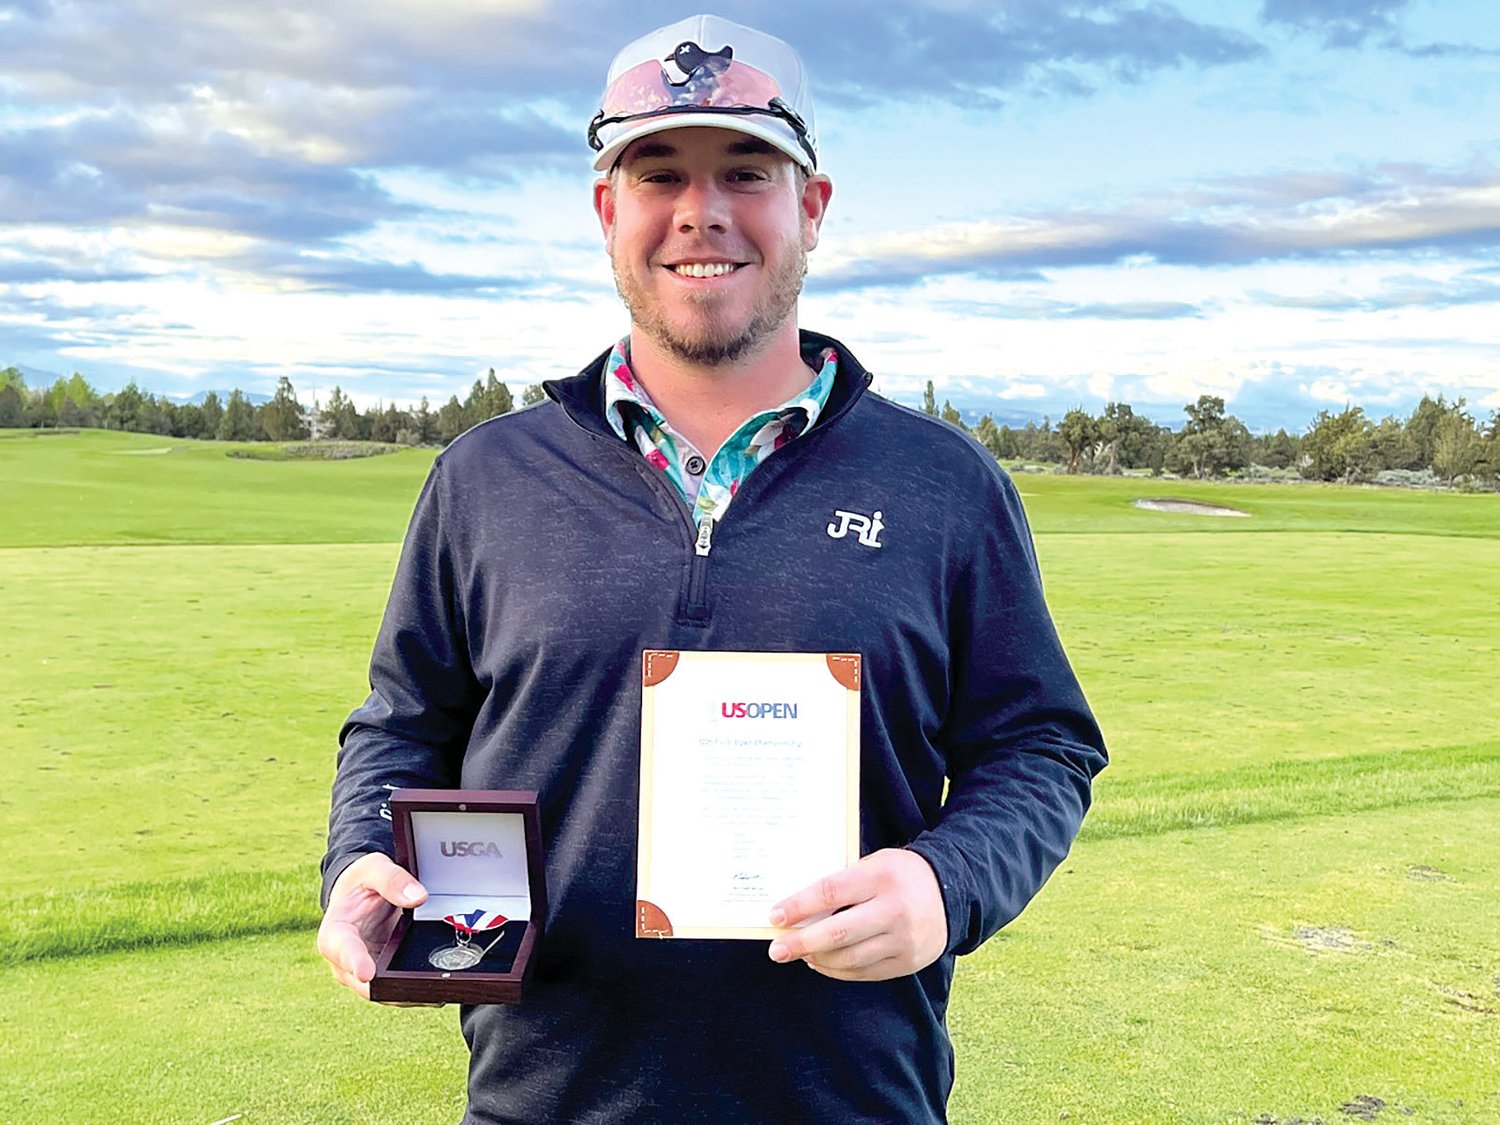 Brady Calkins poses with his U.S. Open qualifying letter at Pronghorn Resort in Bend, Oregon, after finishing tied for first in a 36-hole tournament qualifier.